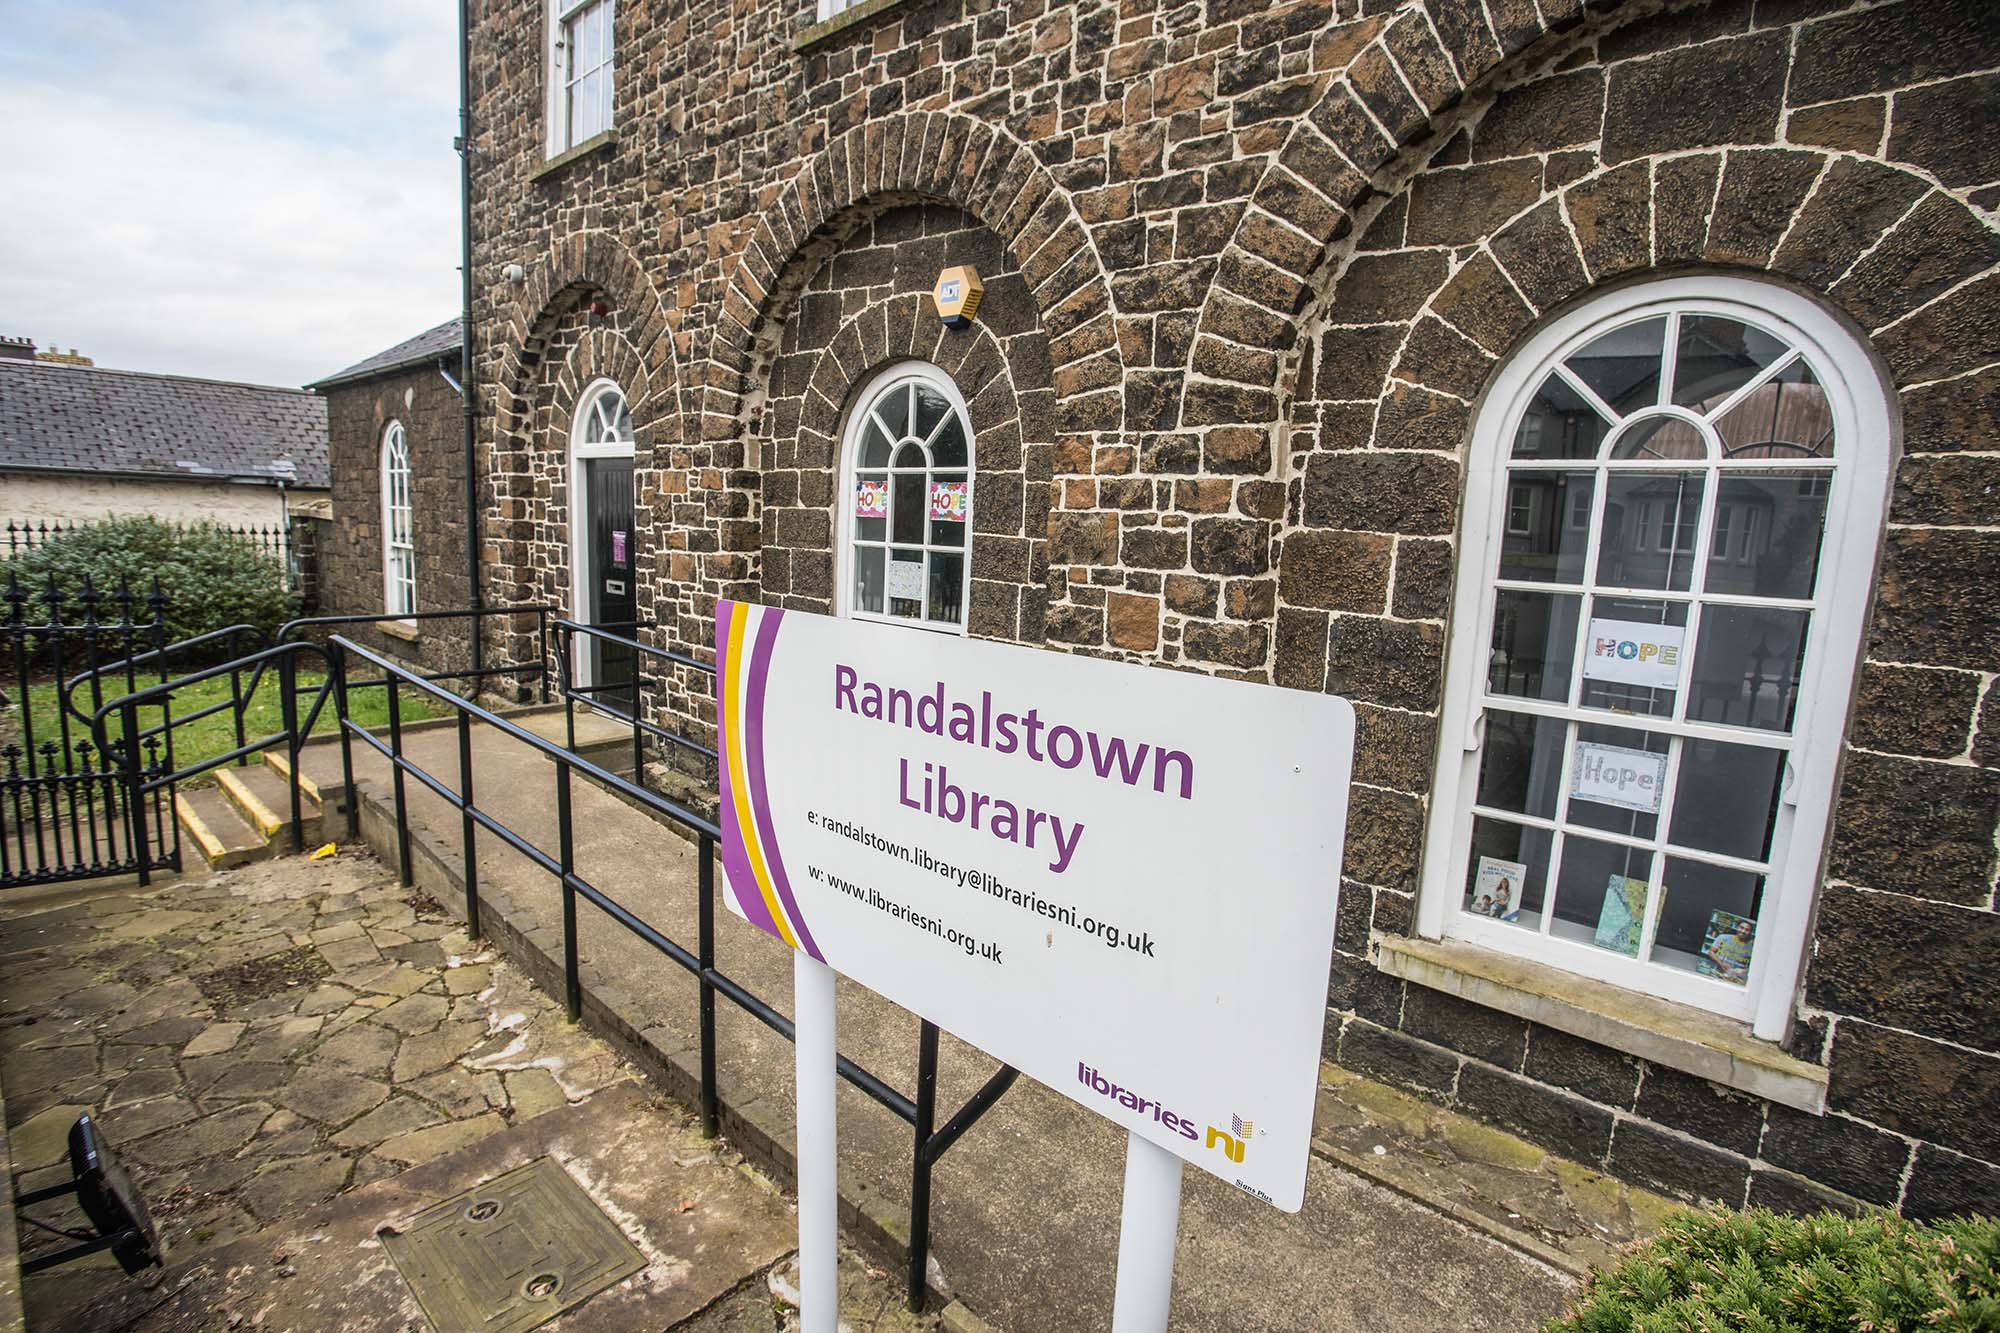 Randalstown Library